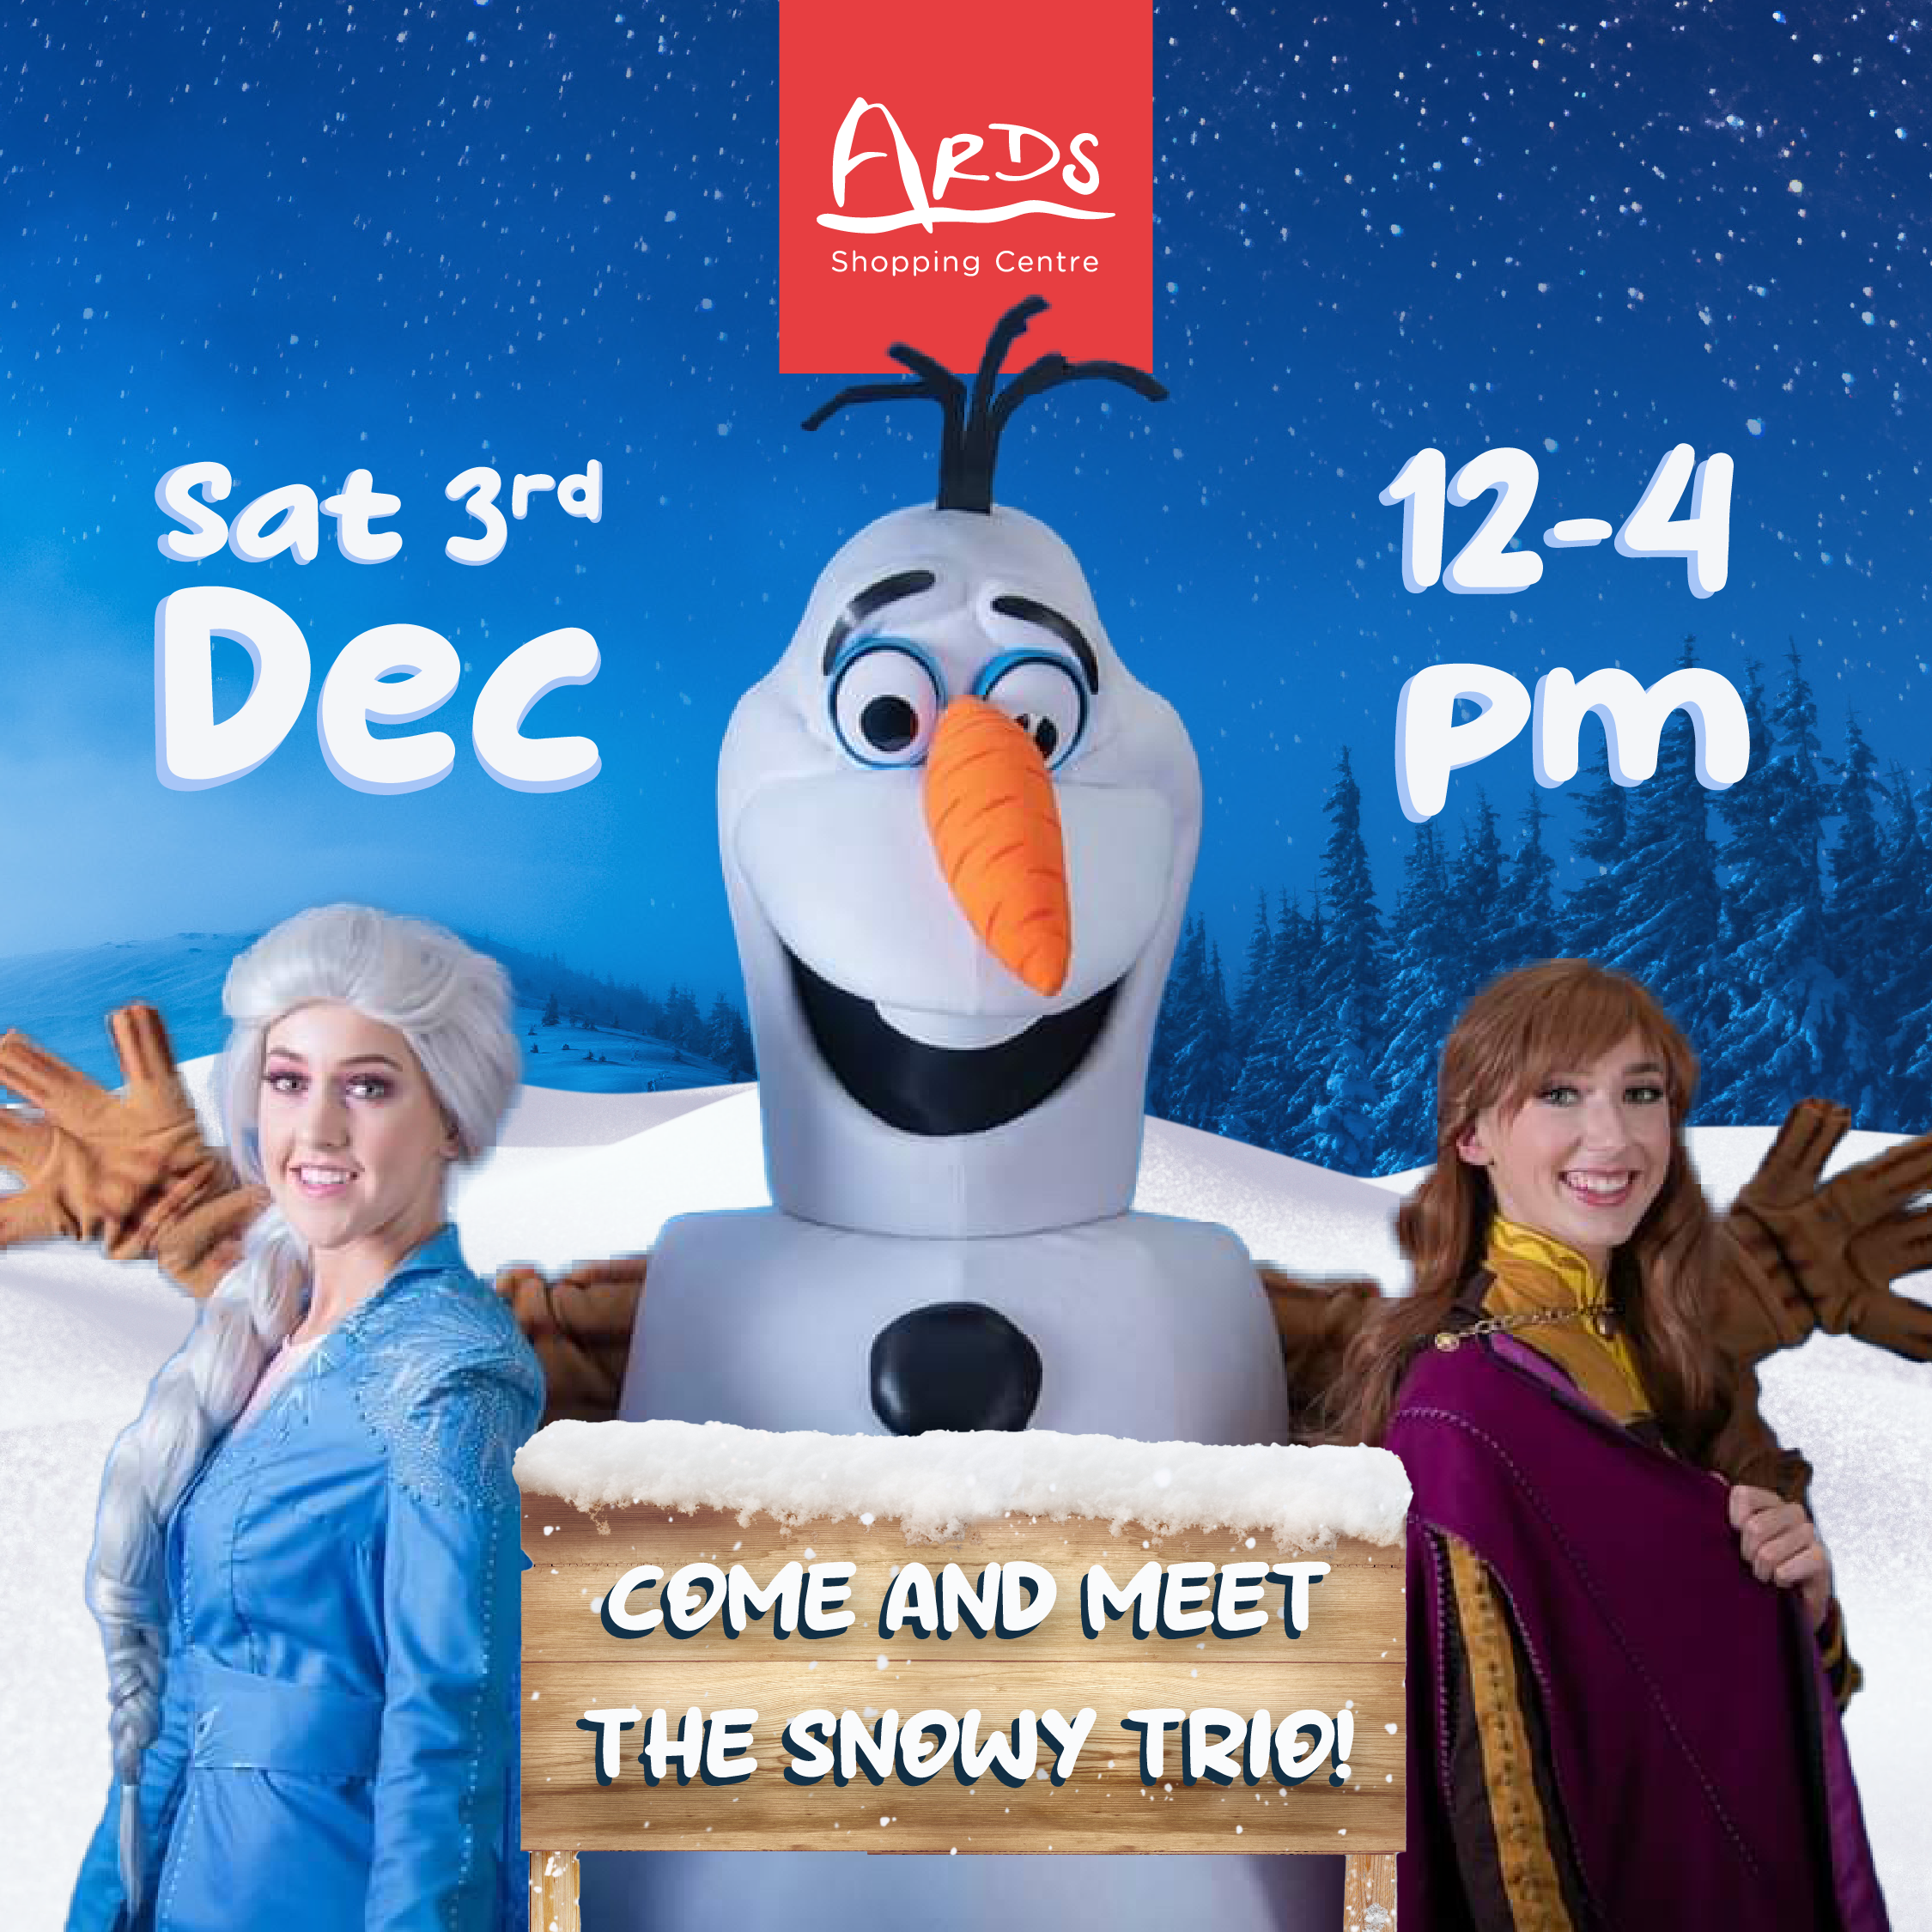 The Snowy Trio arrive this Saturday!